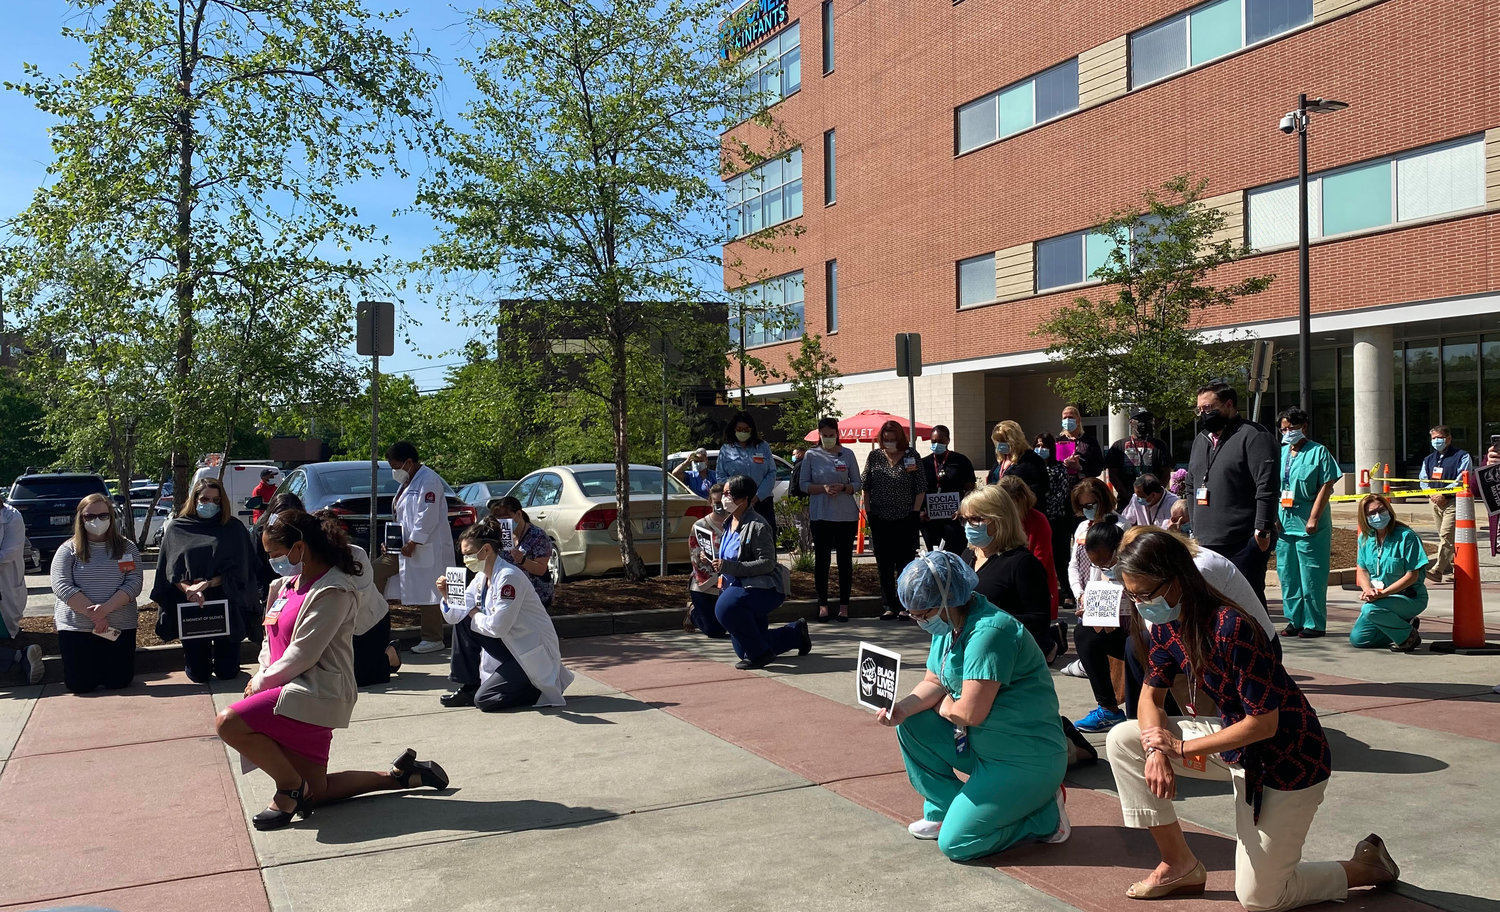 At silent protest was held in front of Women & Infants Hospital on Wednesday, May 25, to commemorate the murder of George Floyd by Minneapolis, Minn., policemen.